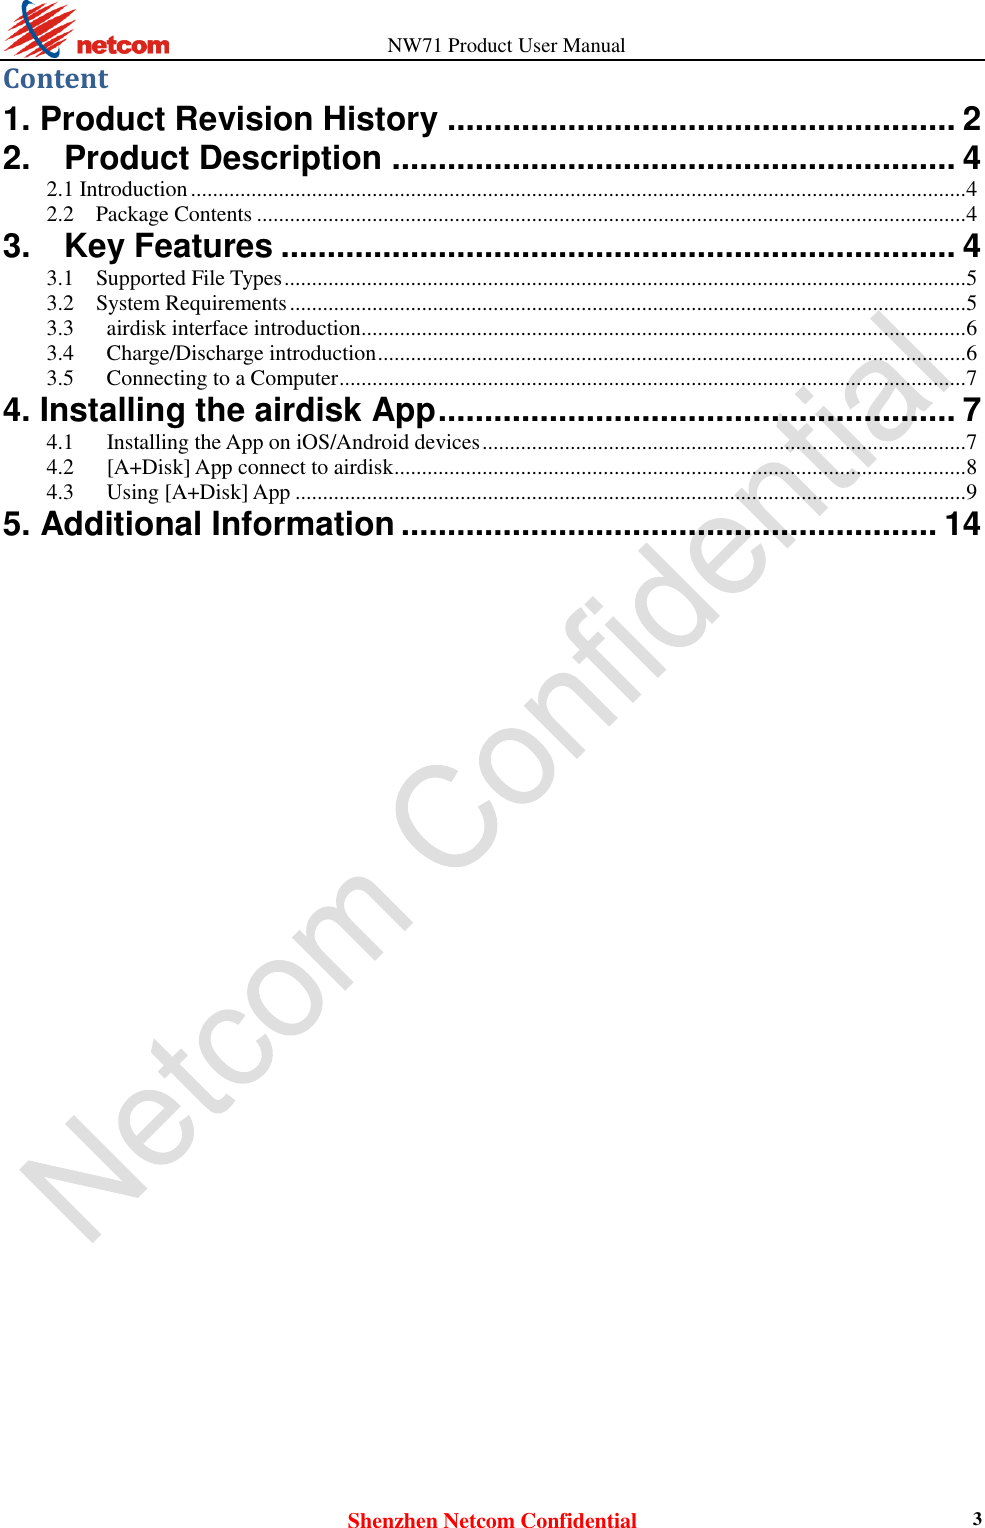                   NW71 Product User Manual Shenzhen Netcom Confidential 3 Content 1. Product Revision History ....................................................... 2 2.    Product Description ............................................................. 4 2.1 Introduction ............................................................................................................................................. 4 2.2    Package Contents ................................................................................................................................. 4 3.    Key Features ......................................................................... 4 3.1    Supported File Types ............................................................................................................................ 5 3.2    System Requirements ........................................................................................................................... 5 3.3      airdisk interface introduction .............................................................................................................. 6 3.4      Charge/Discharge introduction ........................................................................................................... 6 3.5      Connecting to a Computer .................................................................................................................. 7 4. Installing the airdisk App ........................................................ 7 4.1      Installing the App on iOS/Android devices ........................................................................................ 7 4.2      [A+Disk] App connect to airdisk ........................................................................................................ 8 4.3      Using [A+Disk] App .......................................................................................................................... 9 5. Additional Information .......................................................... 14                                 